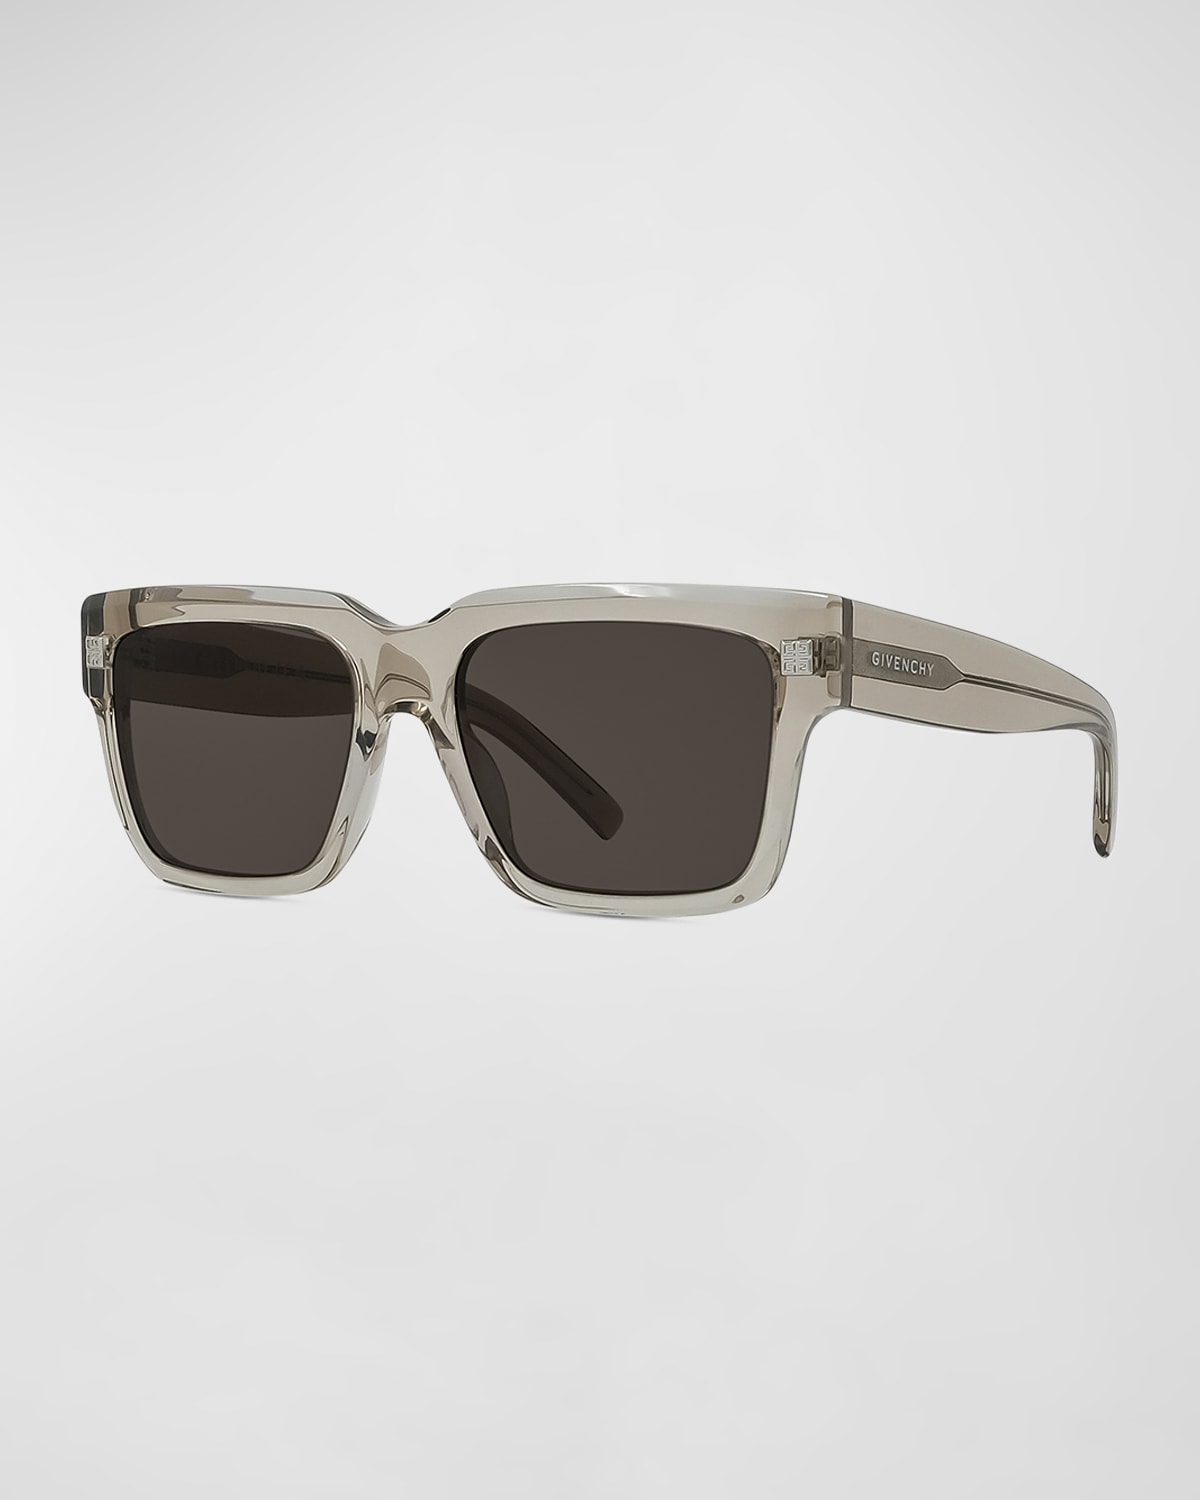 Givenchy Men's Gv Day Acetate Square Sunglasses In Shiny Light Brown